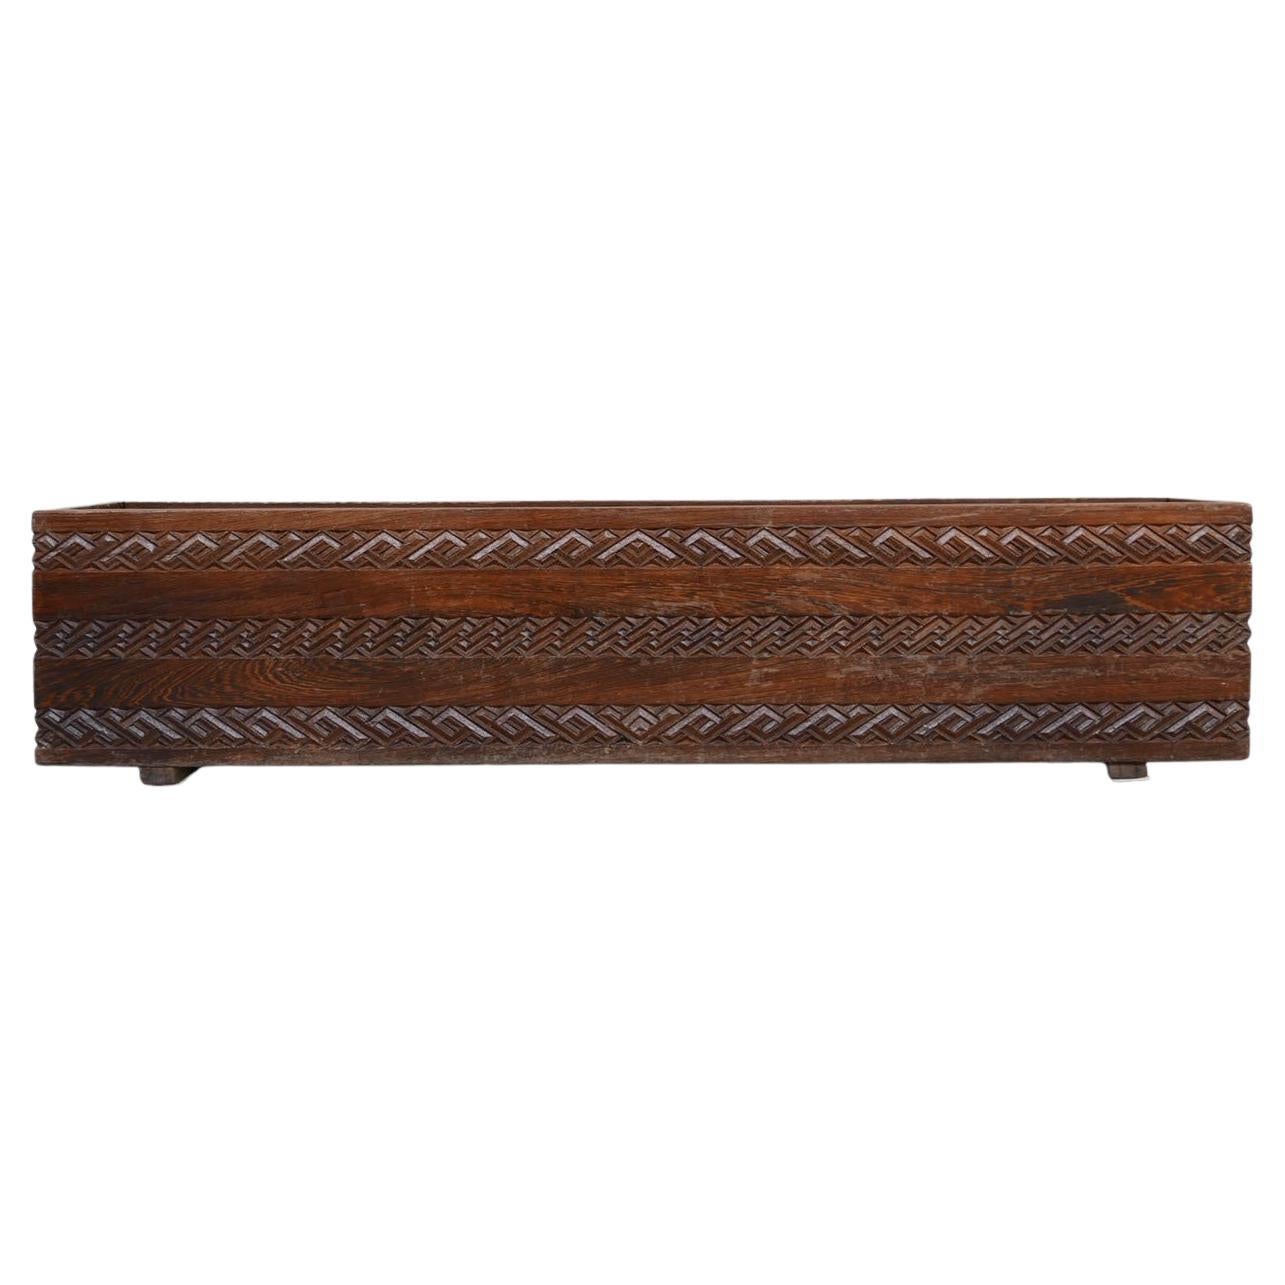 Carved Wenge Mid-Century Belgium Congolese Planter For Sale